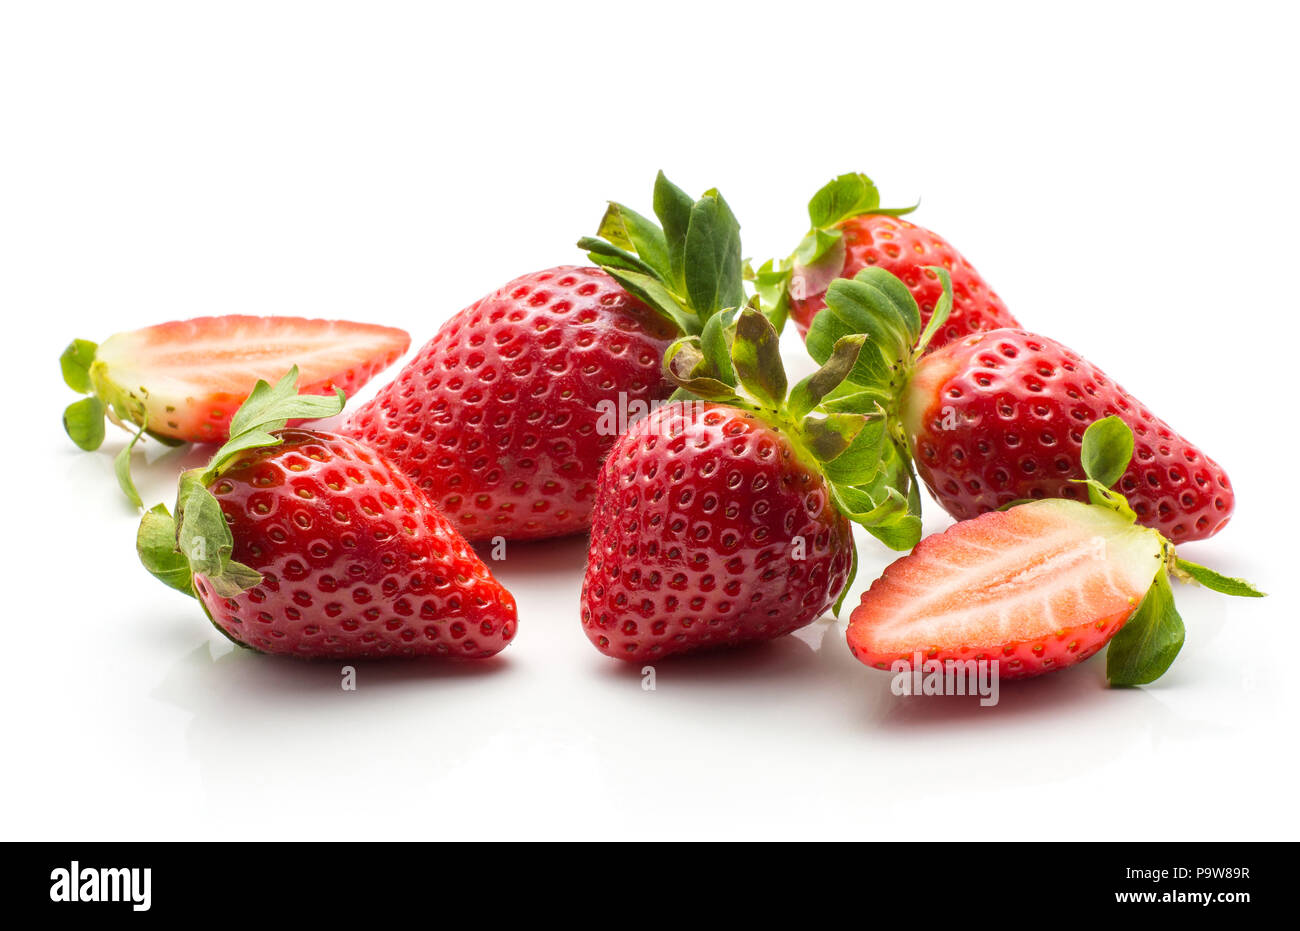 Garden strawberries set isolated on white background ripe whole and one cut in half Stock Photo